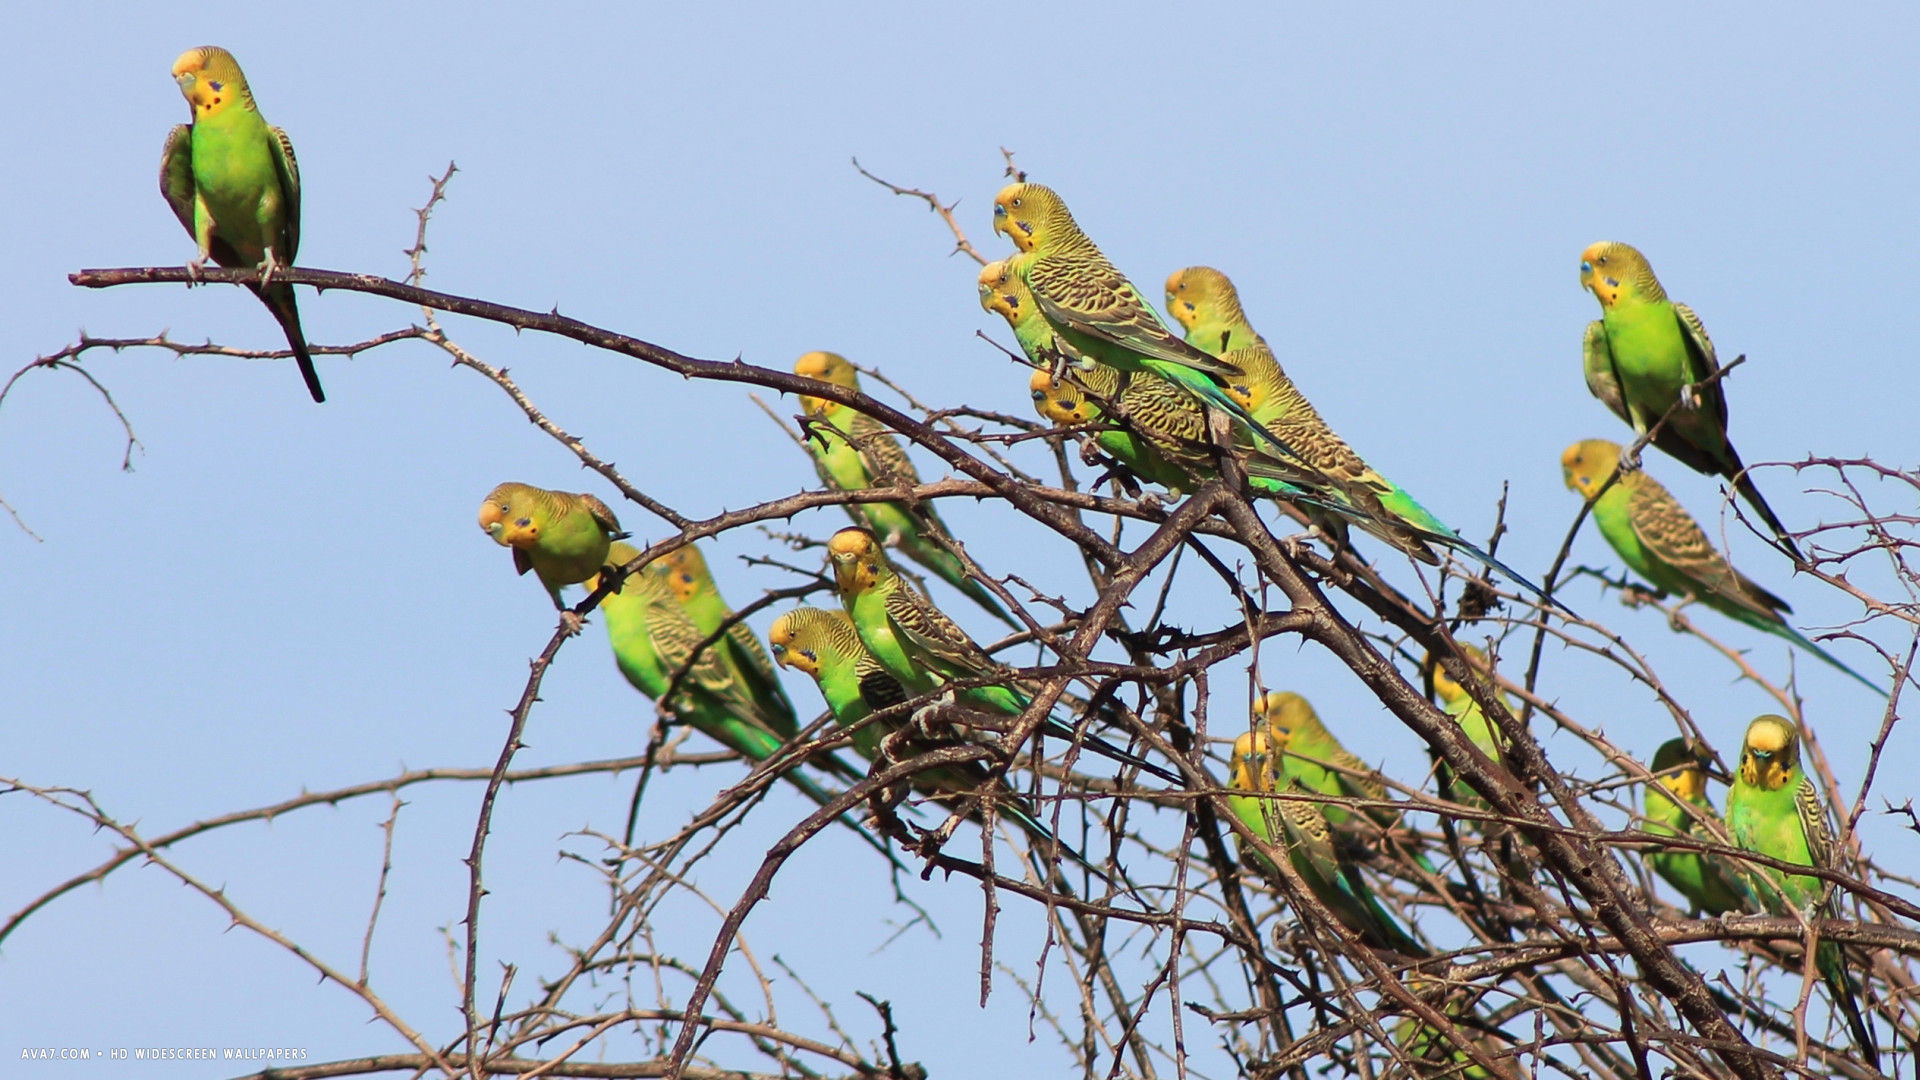 1920x1080 budgie many green wild budgies tree birds branches hd widescreen wallpaper